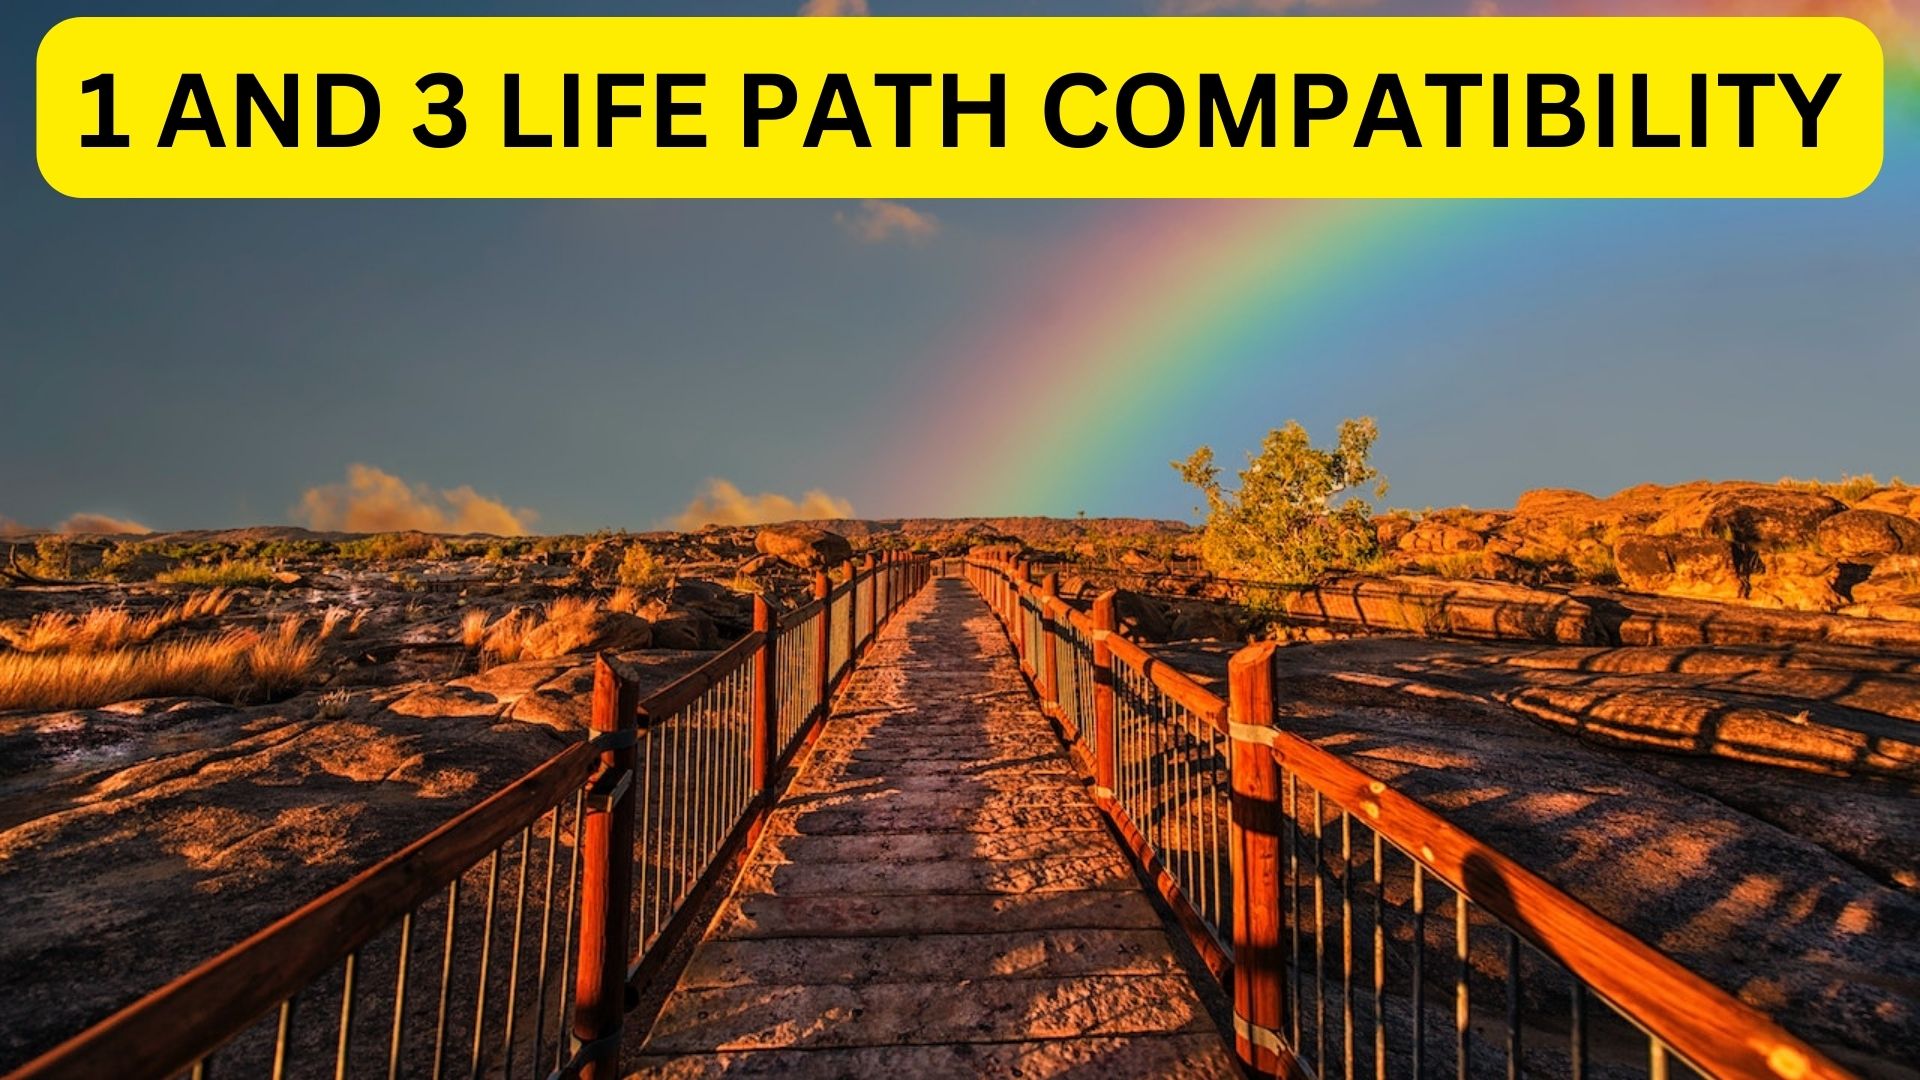 1 And 3 Life Path Compatibility - Quite Amazing